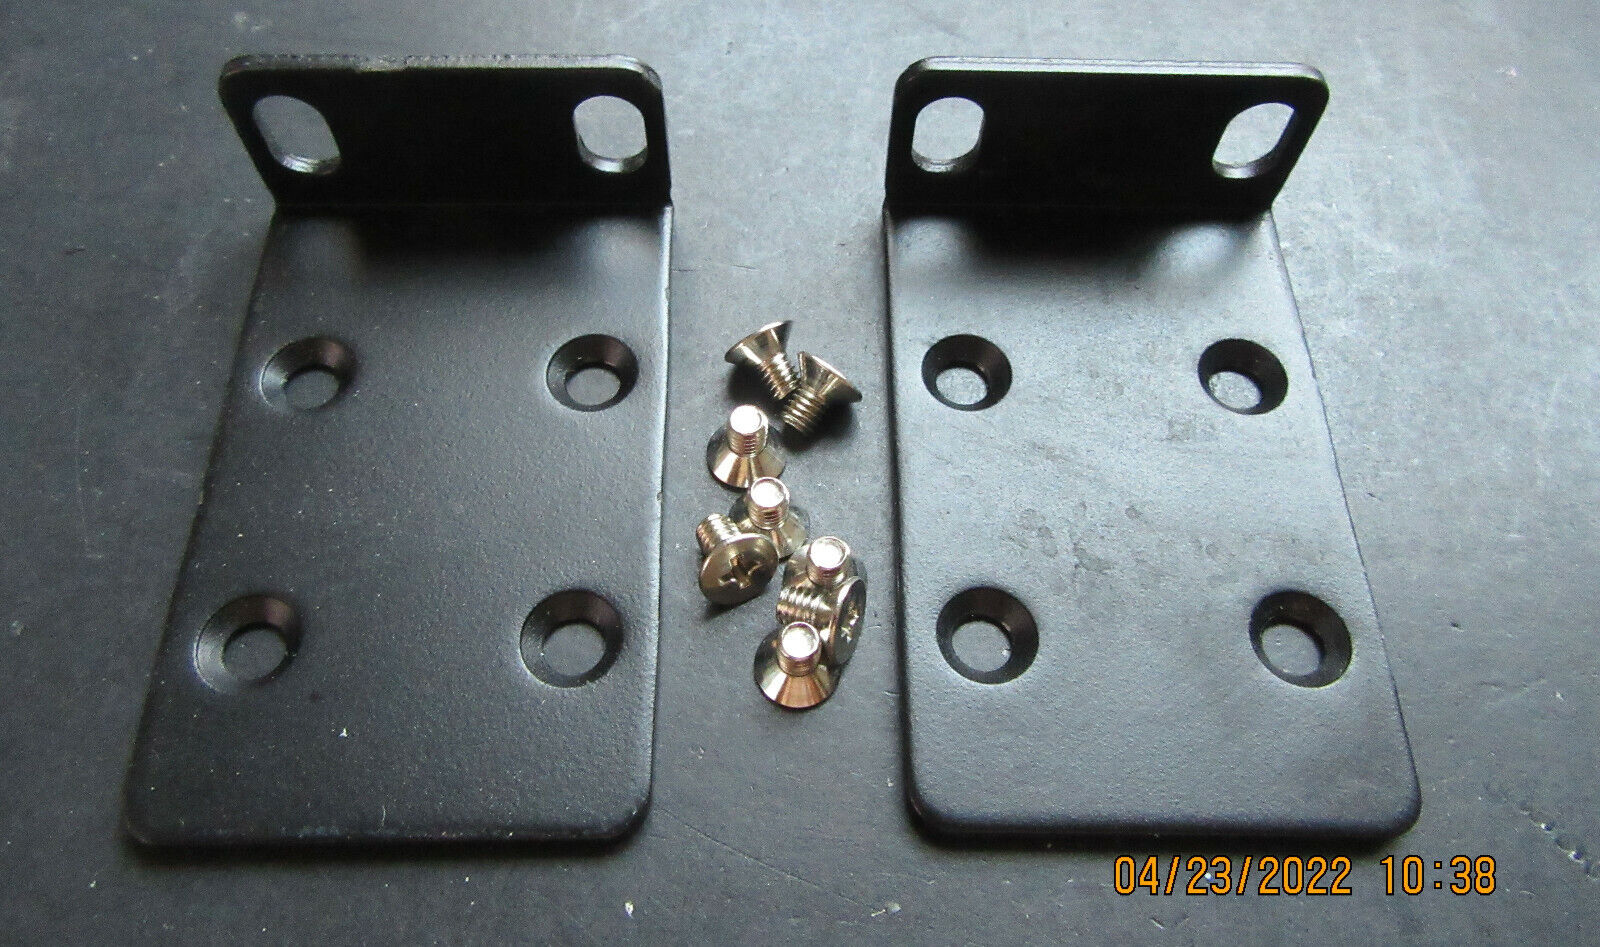 Genuine Ears with 8 Screws for Cisco SG200-50 / SG200-26 Switch